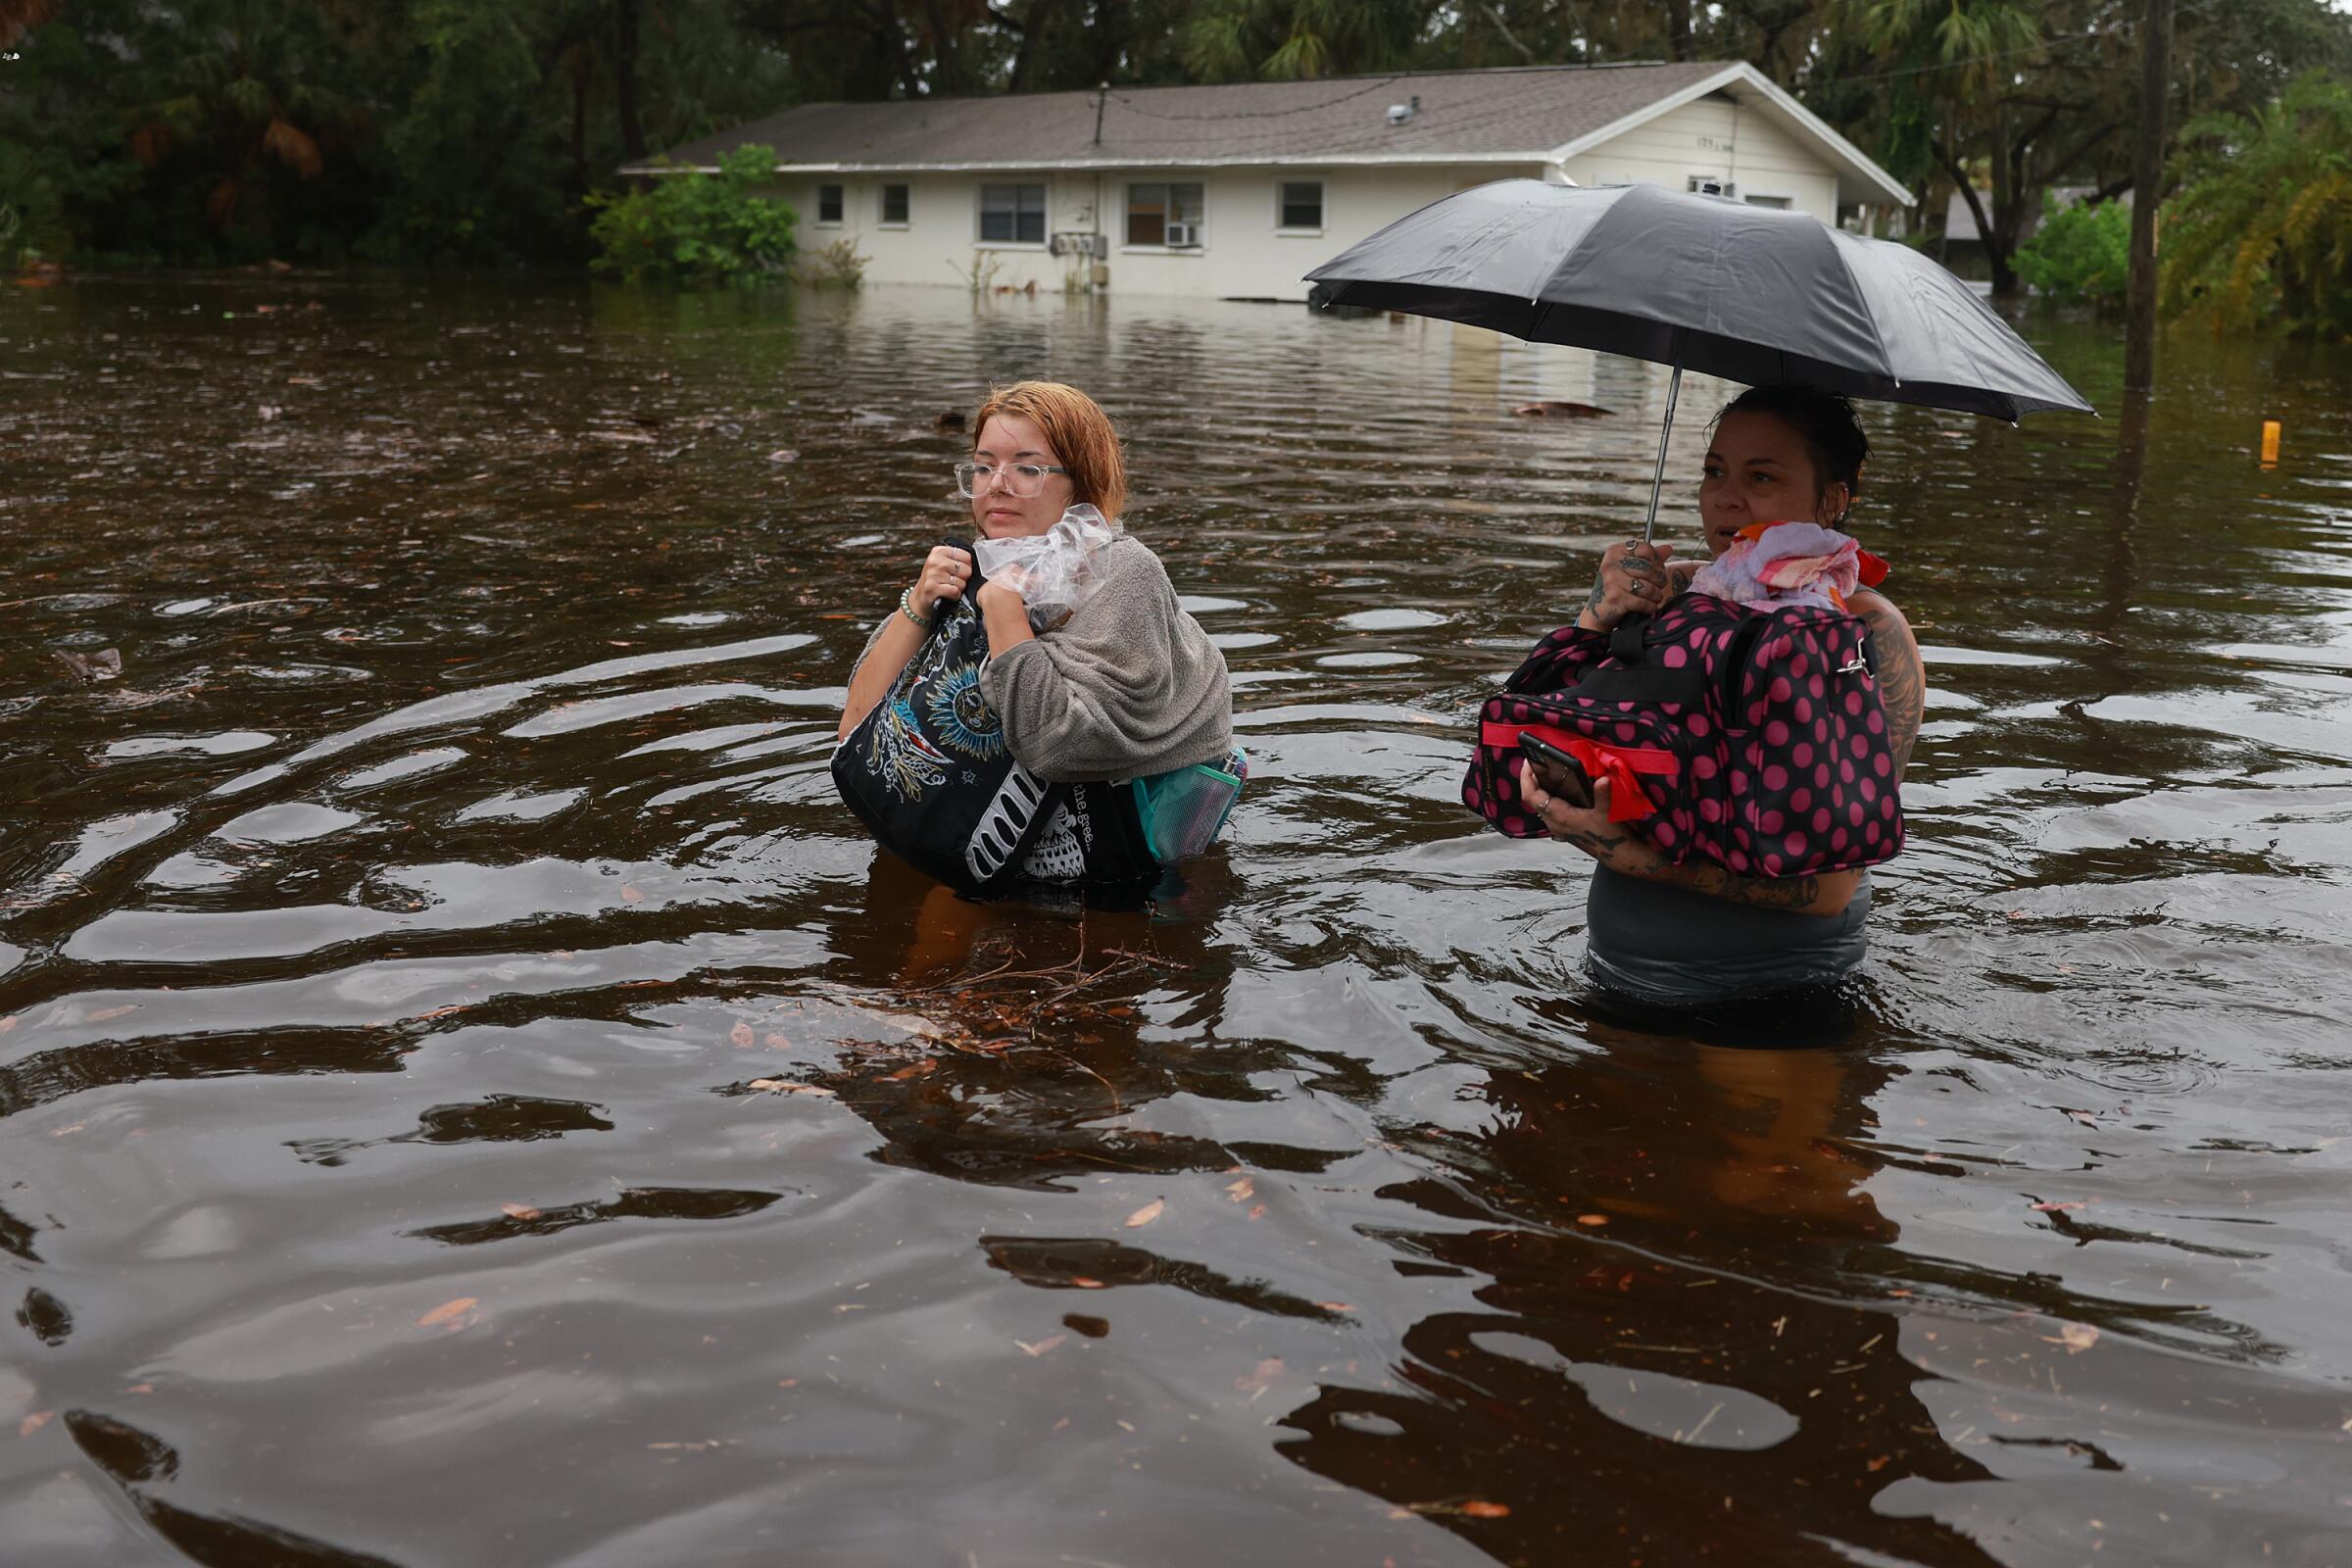 A mother and daughter wade through deep floodwaters.